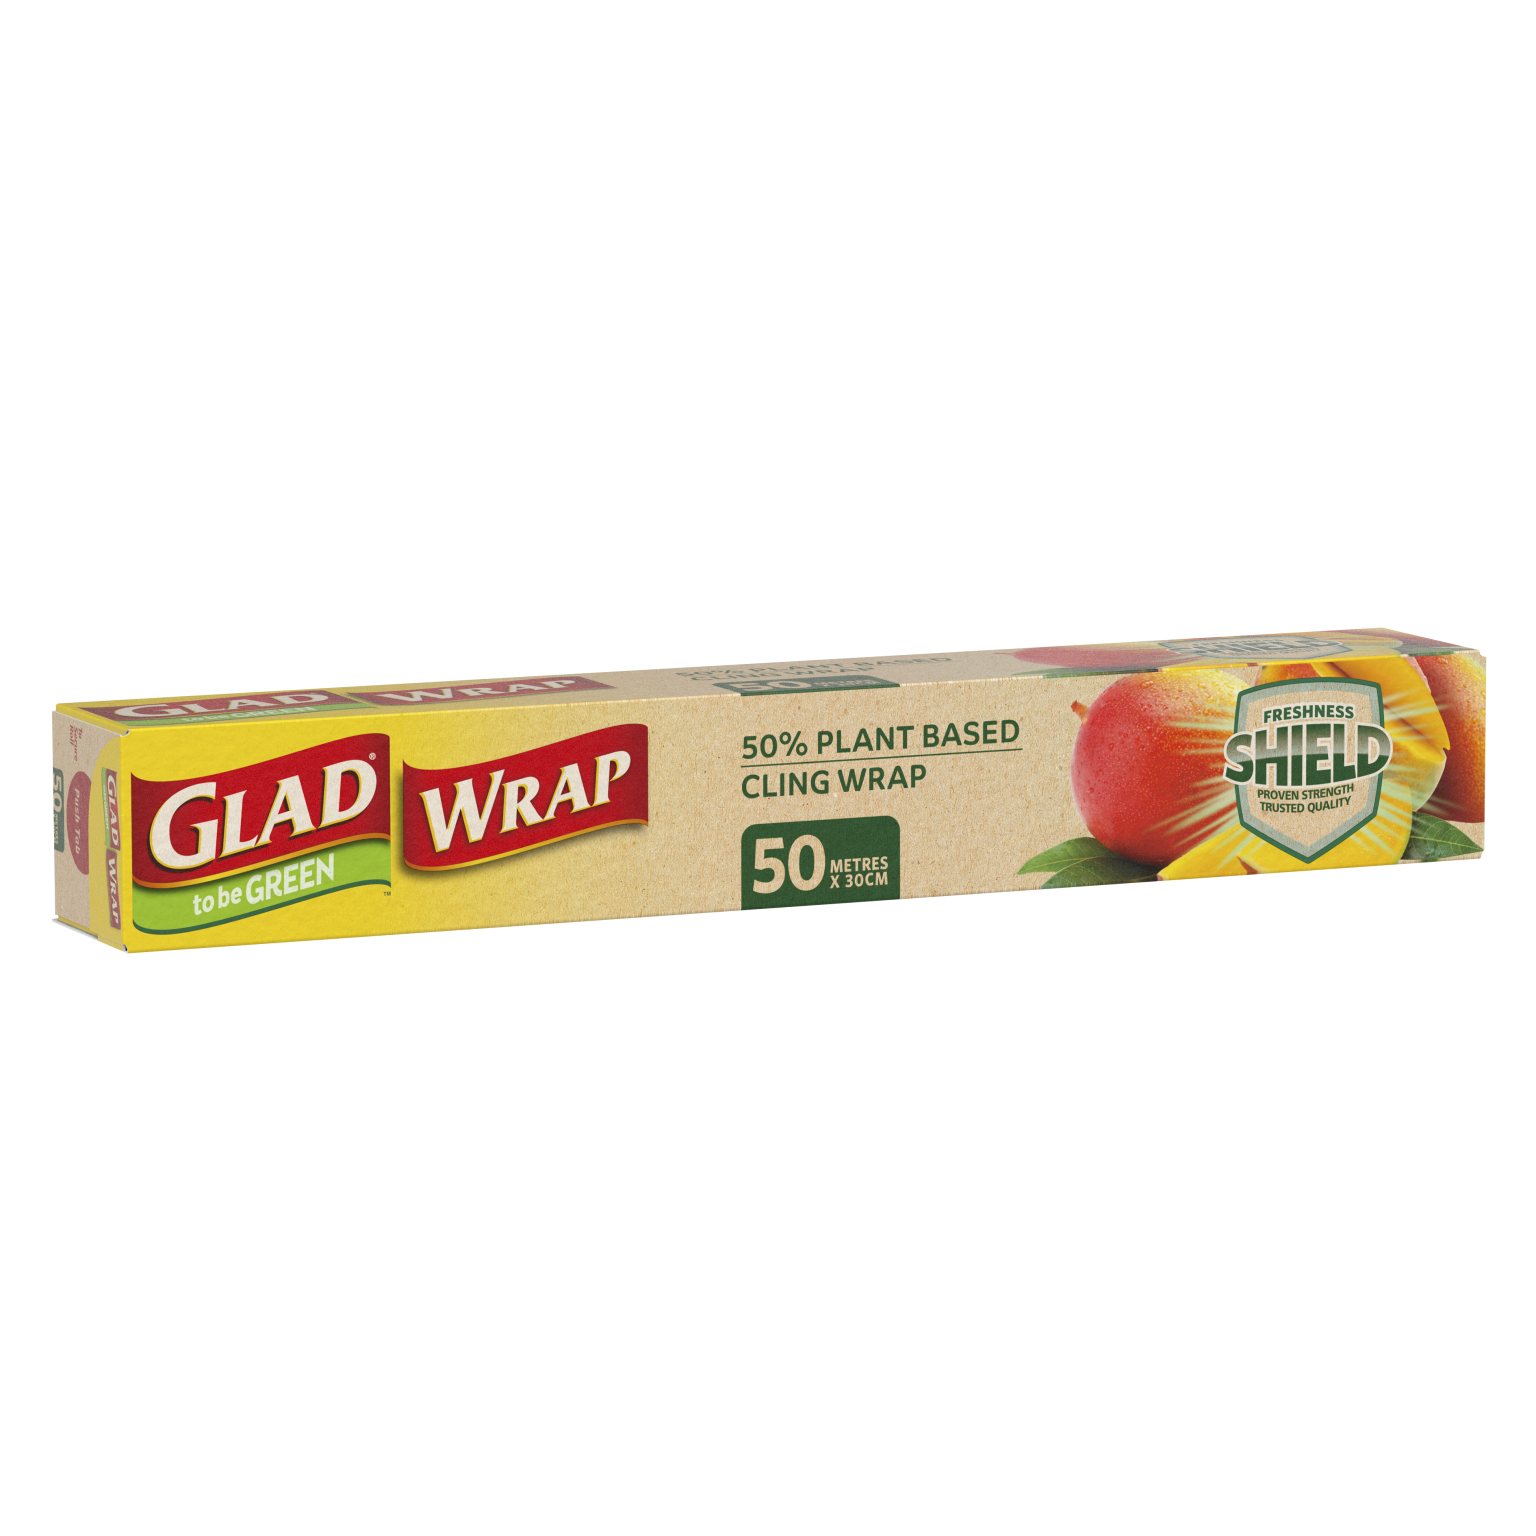 Glad to be Green® Plant Based Cling Wrap 50m, Glad NewZealand